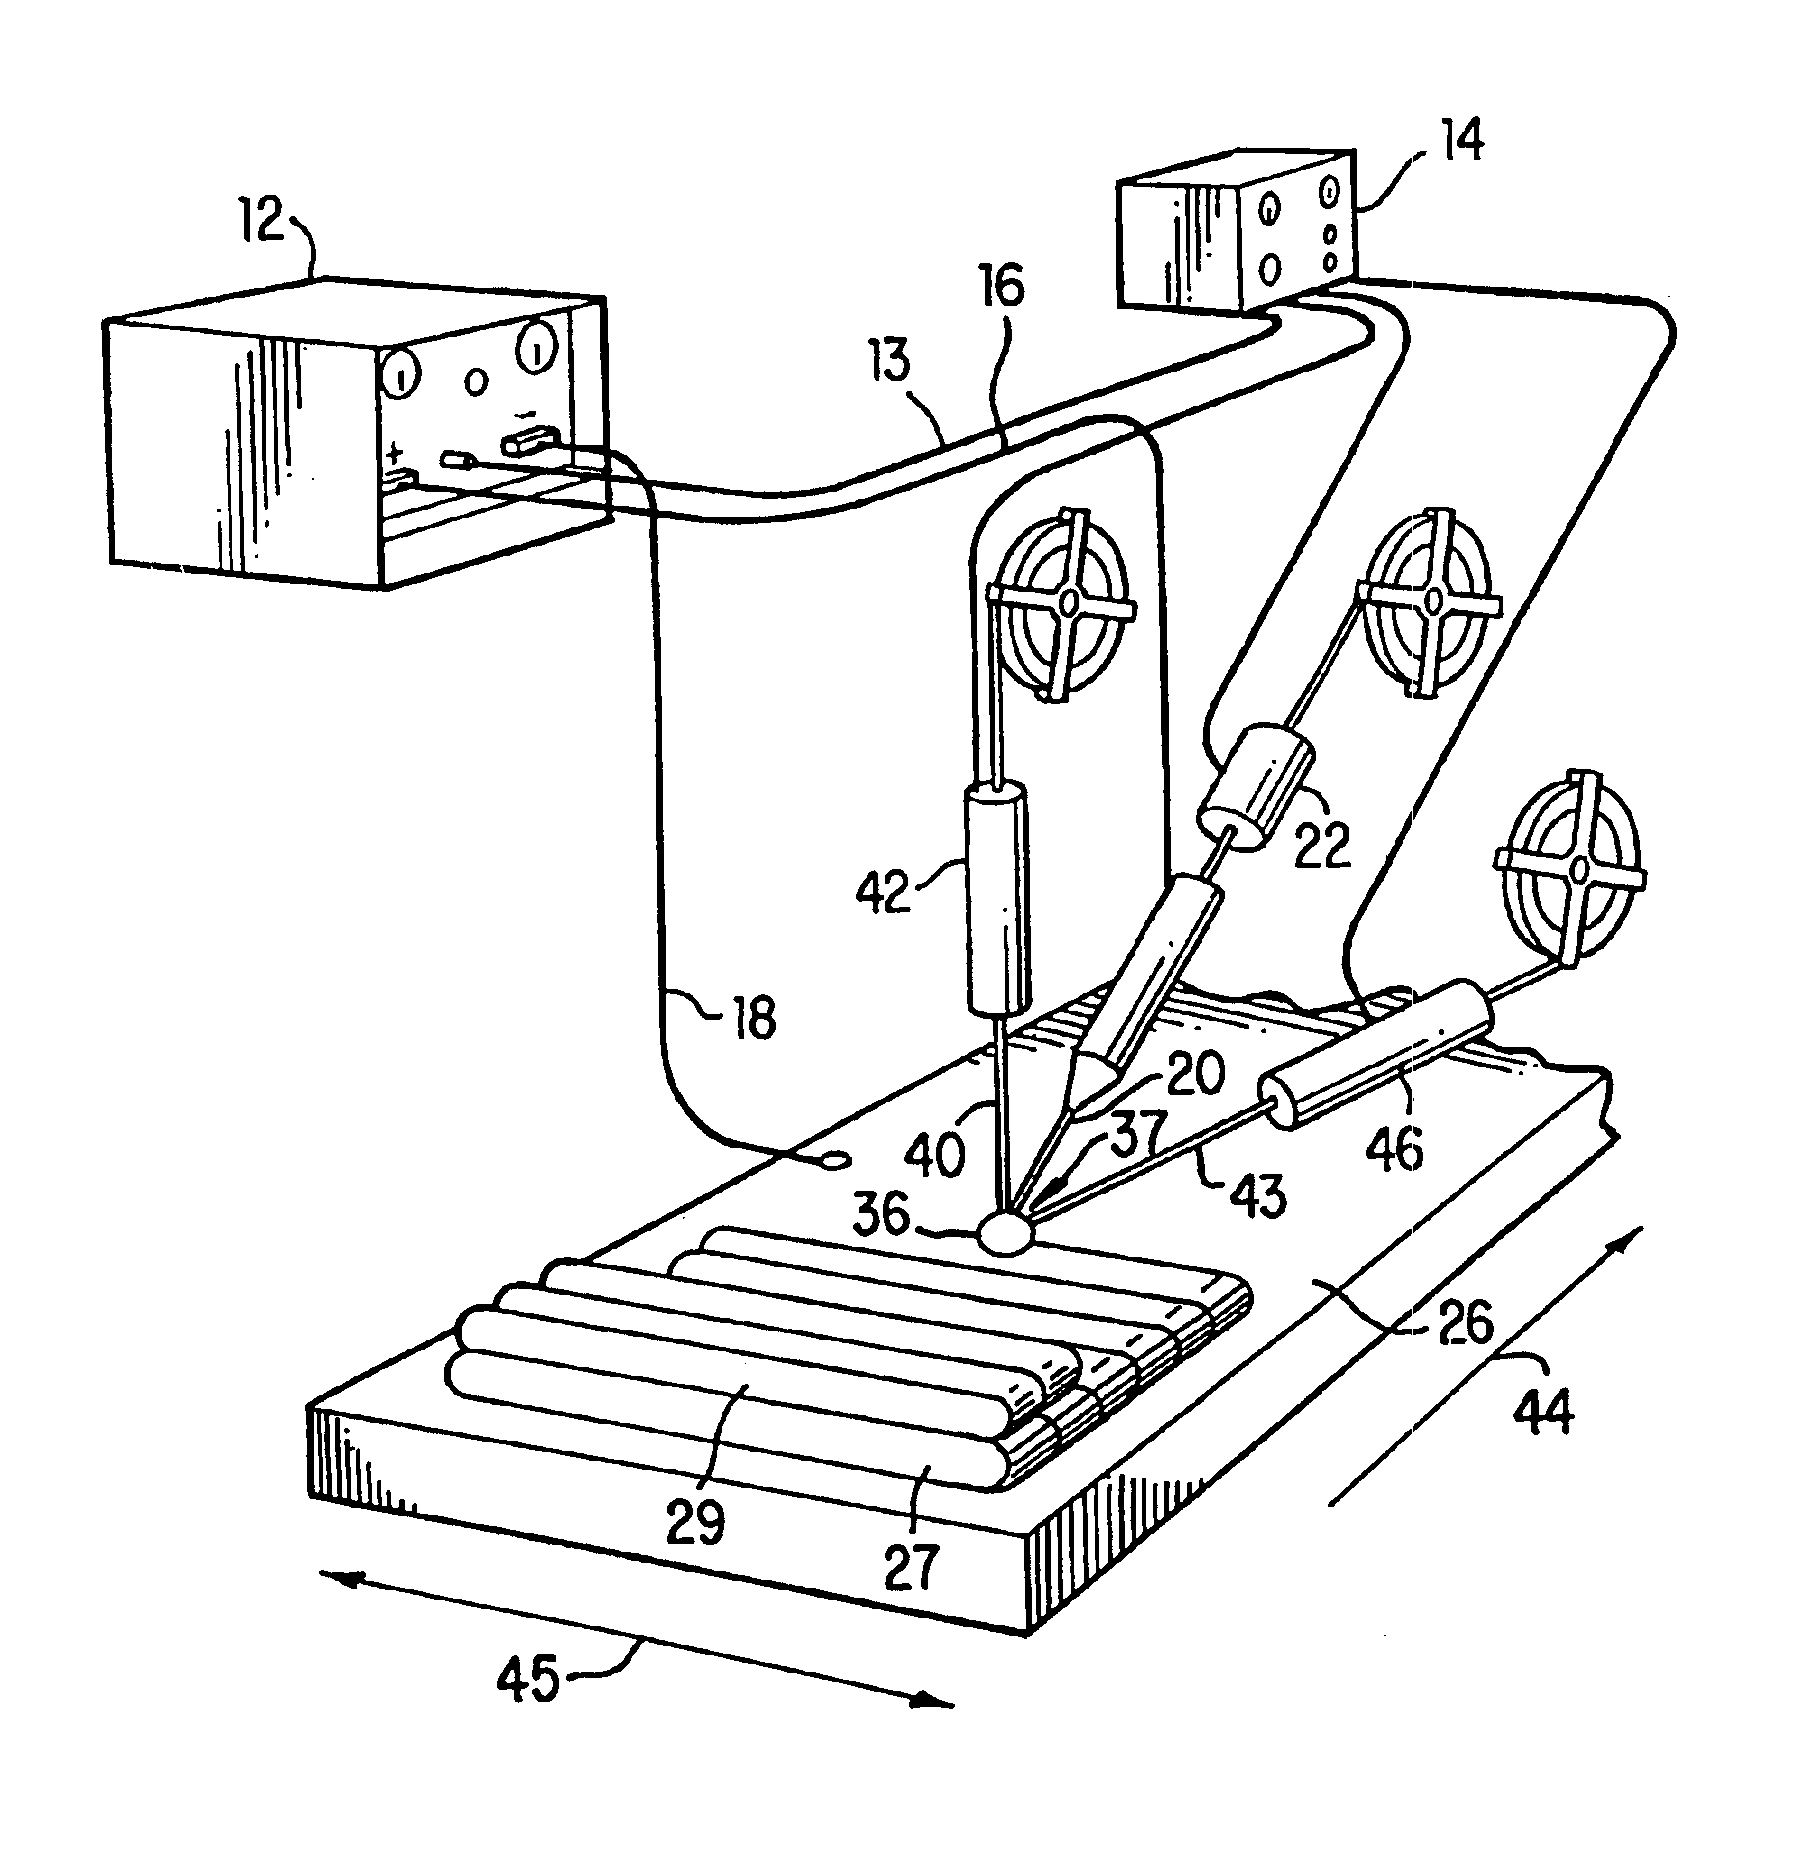 Controlled composition welding method